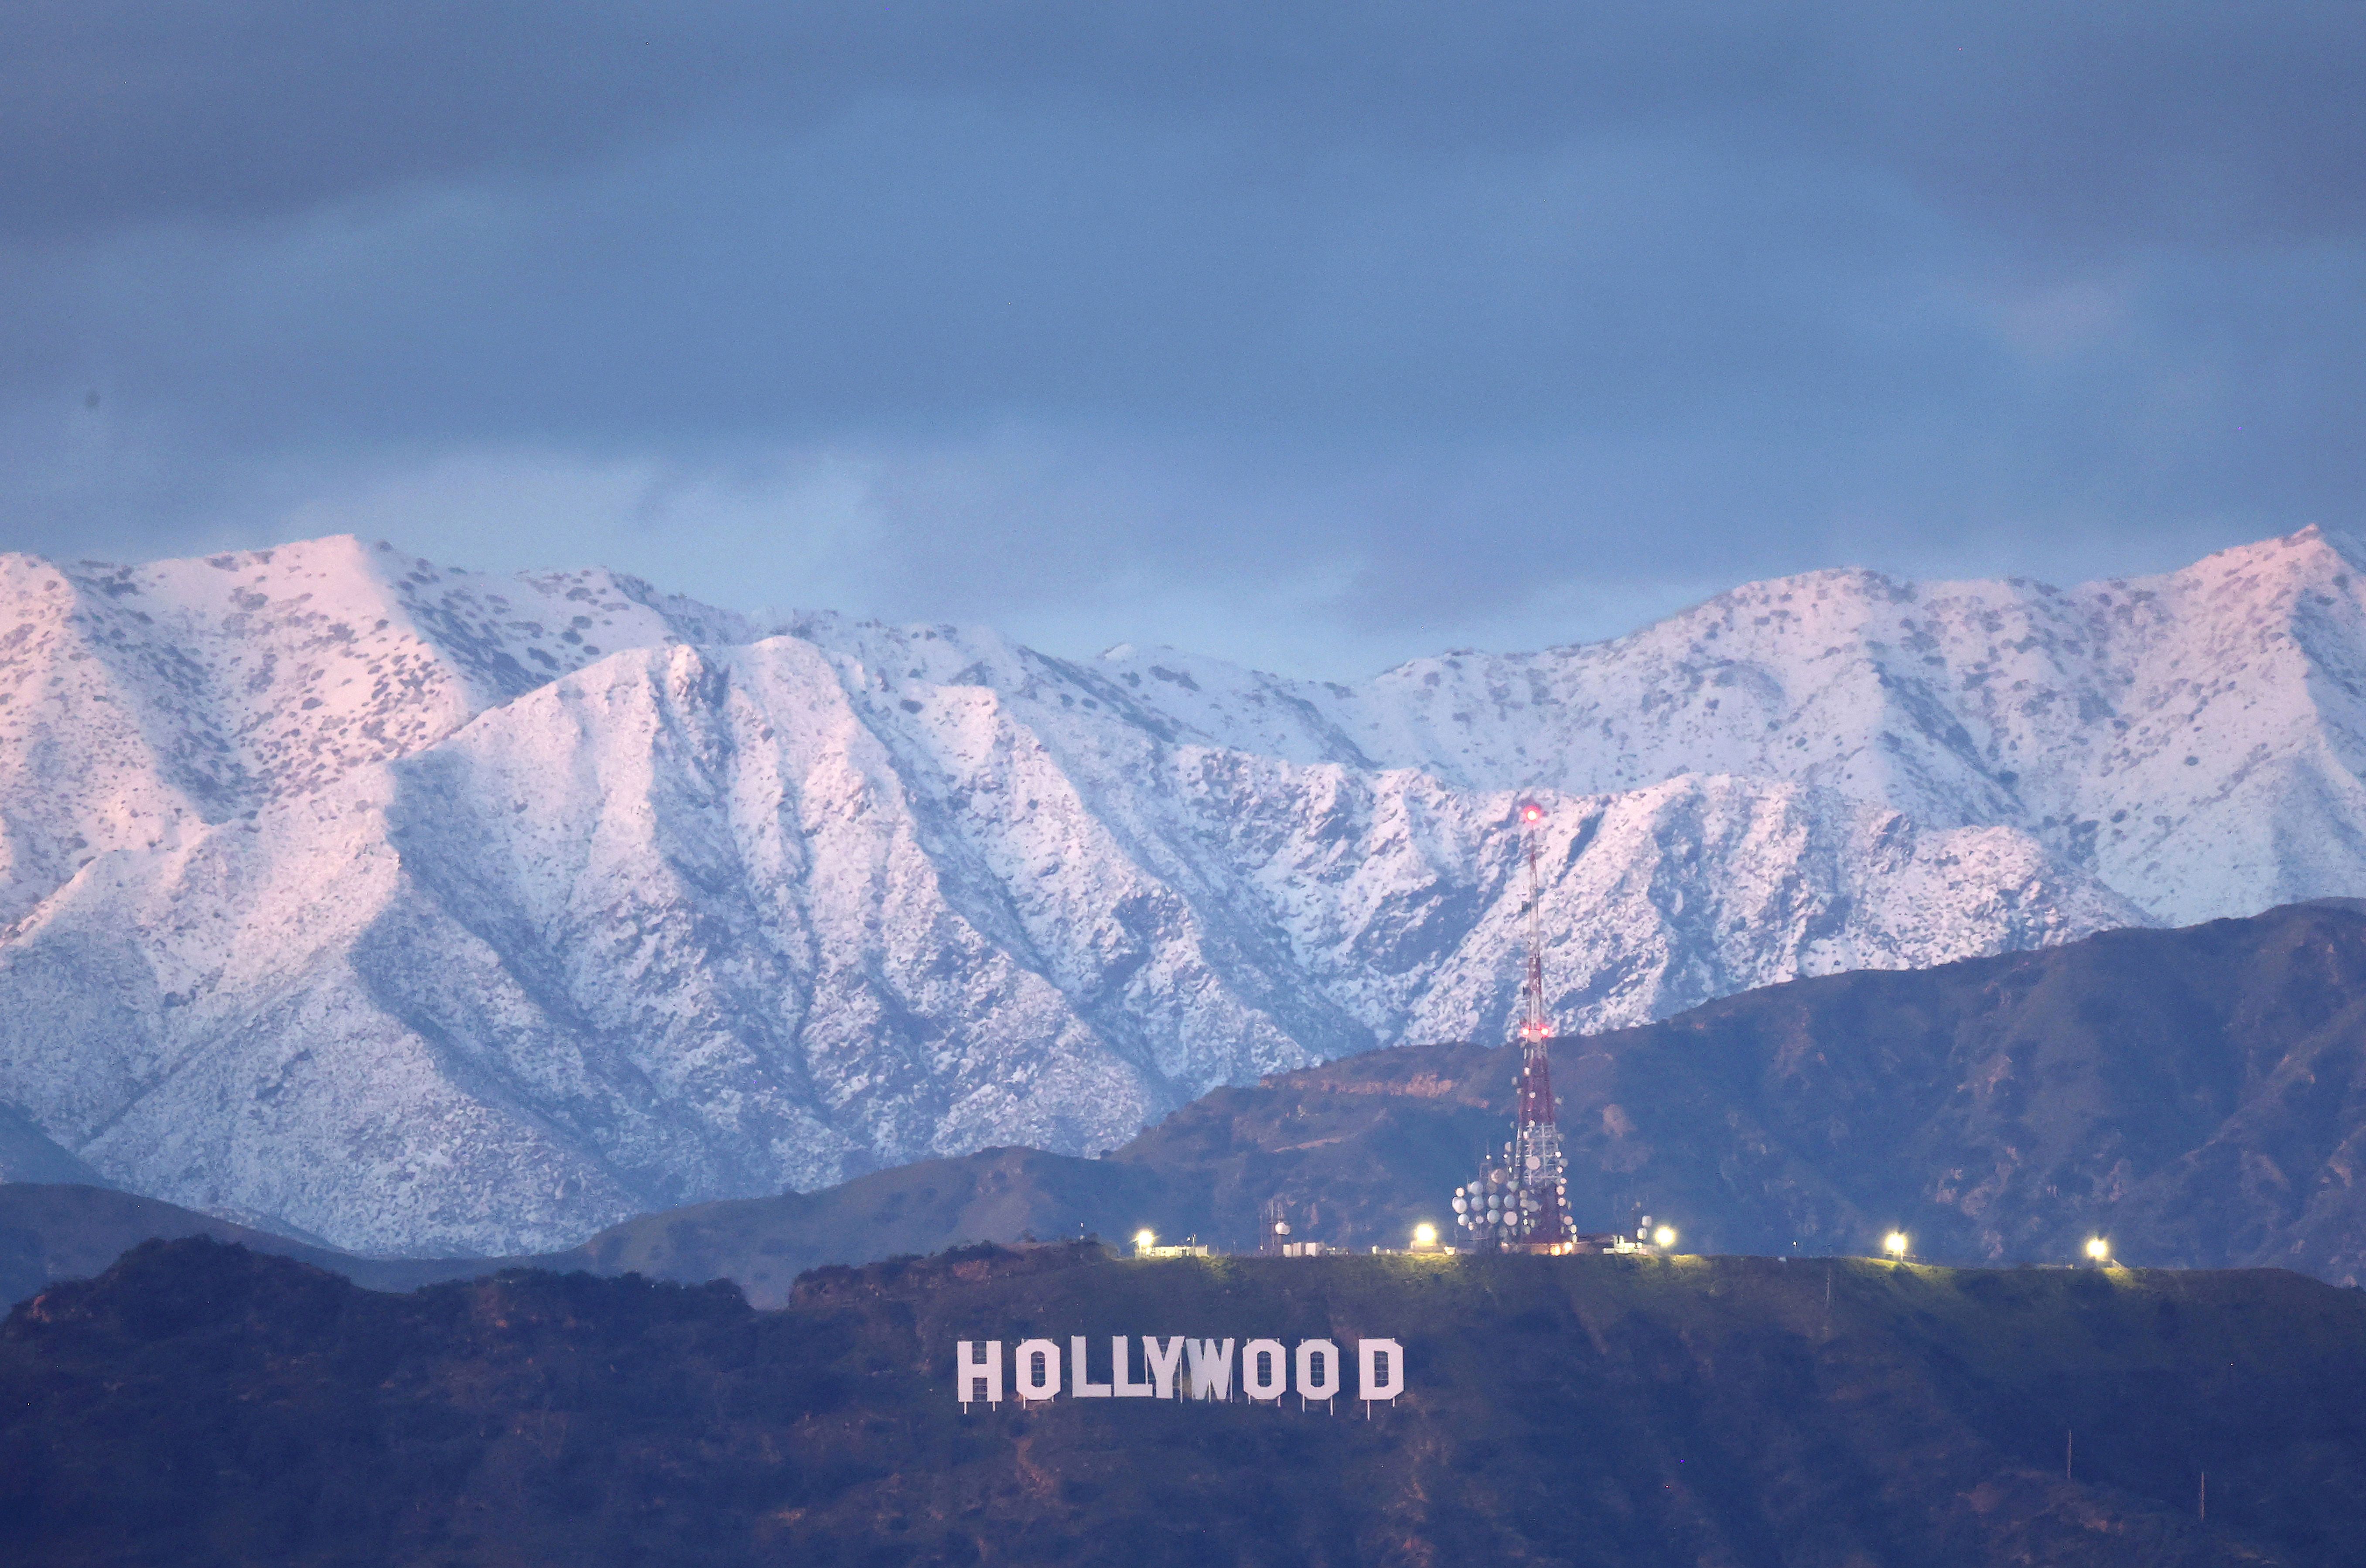 The Hollywood sign stands in front of snow-covered mountains after another winter storm hit Southern California on March 01, 2023 in Los Angeles.